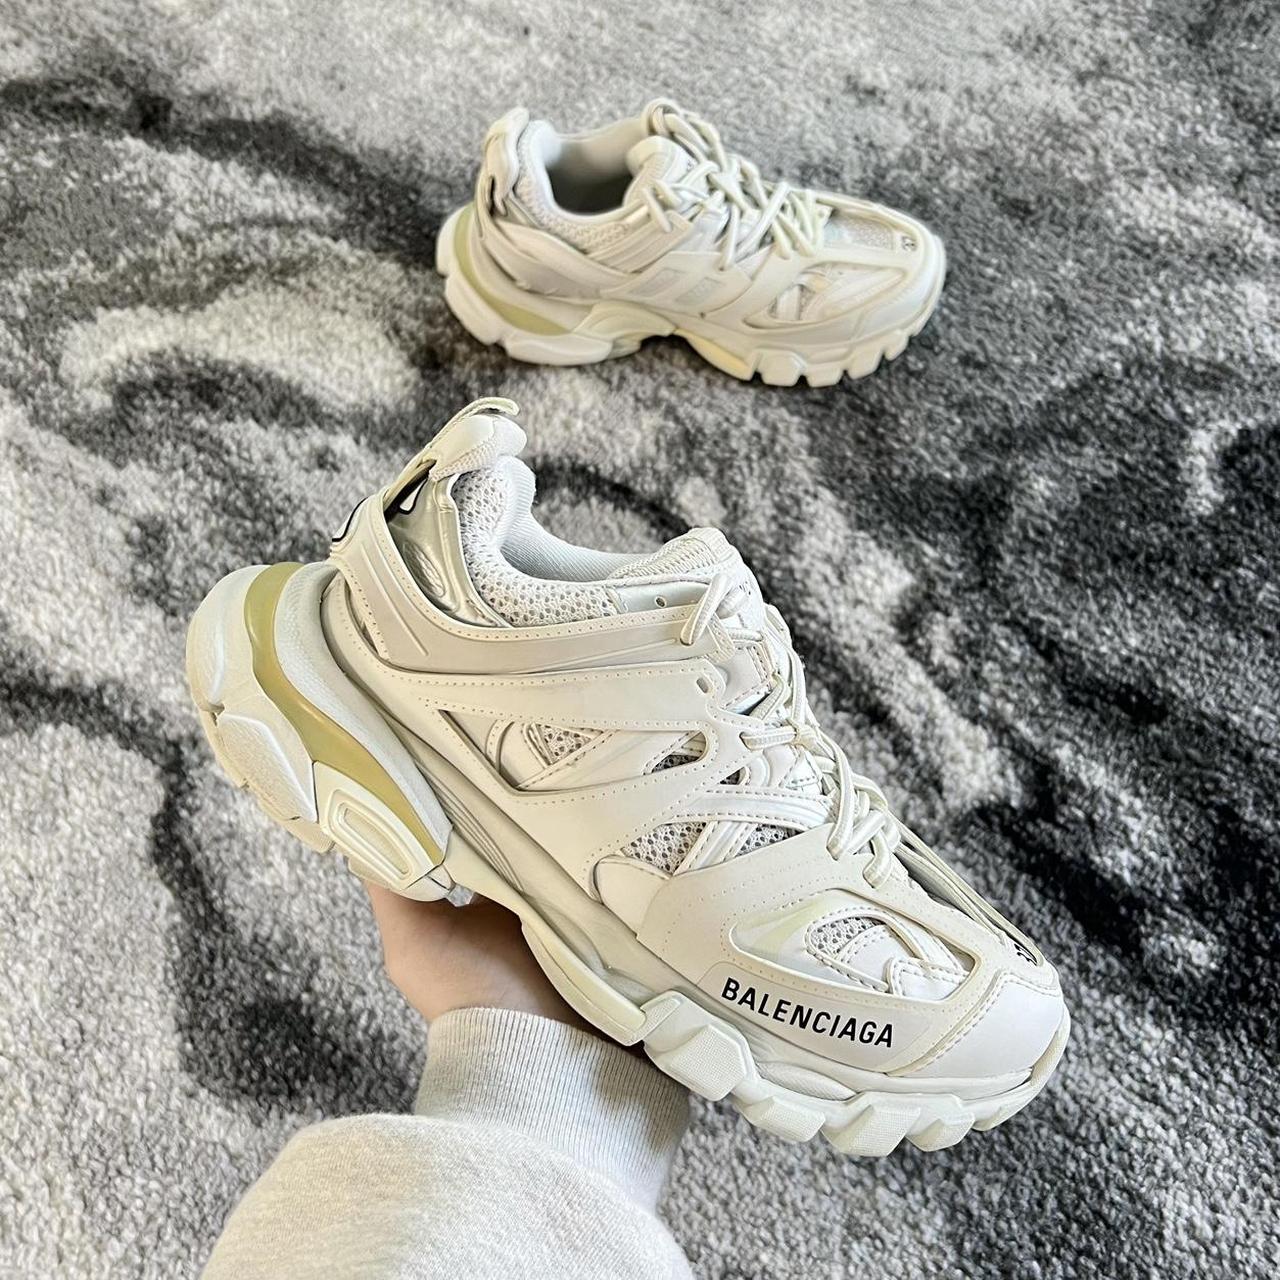 THE PRICE IS FIRM Balenciaga White Low Top... - Depop